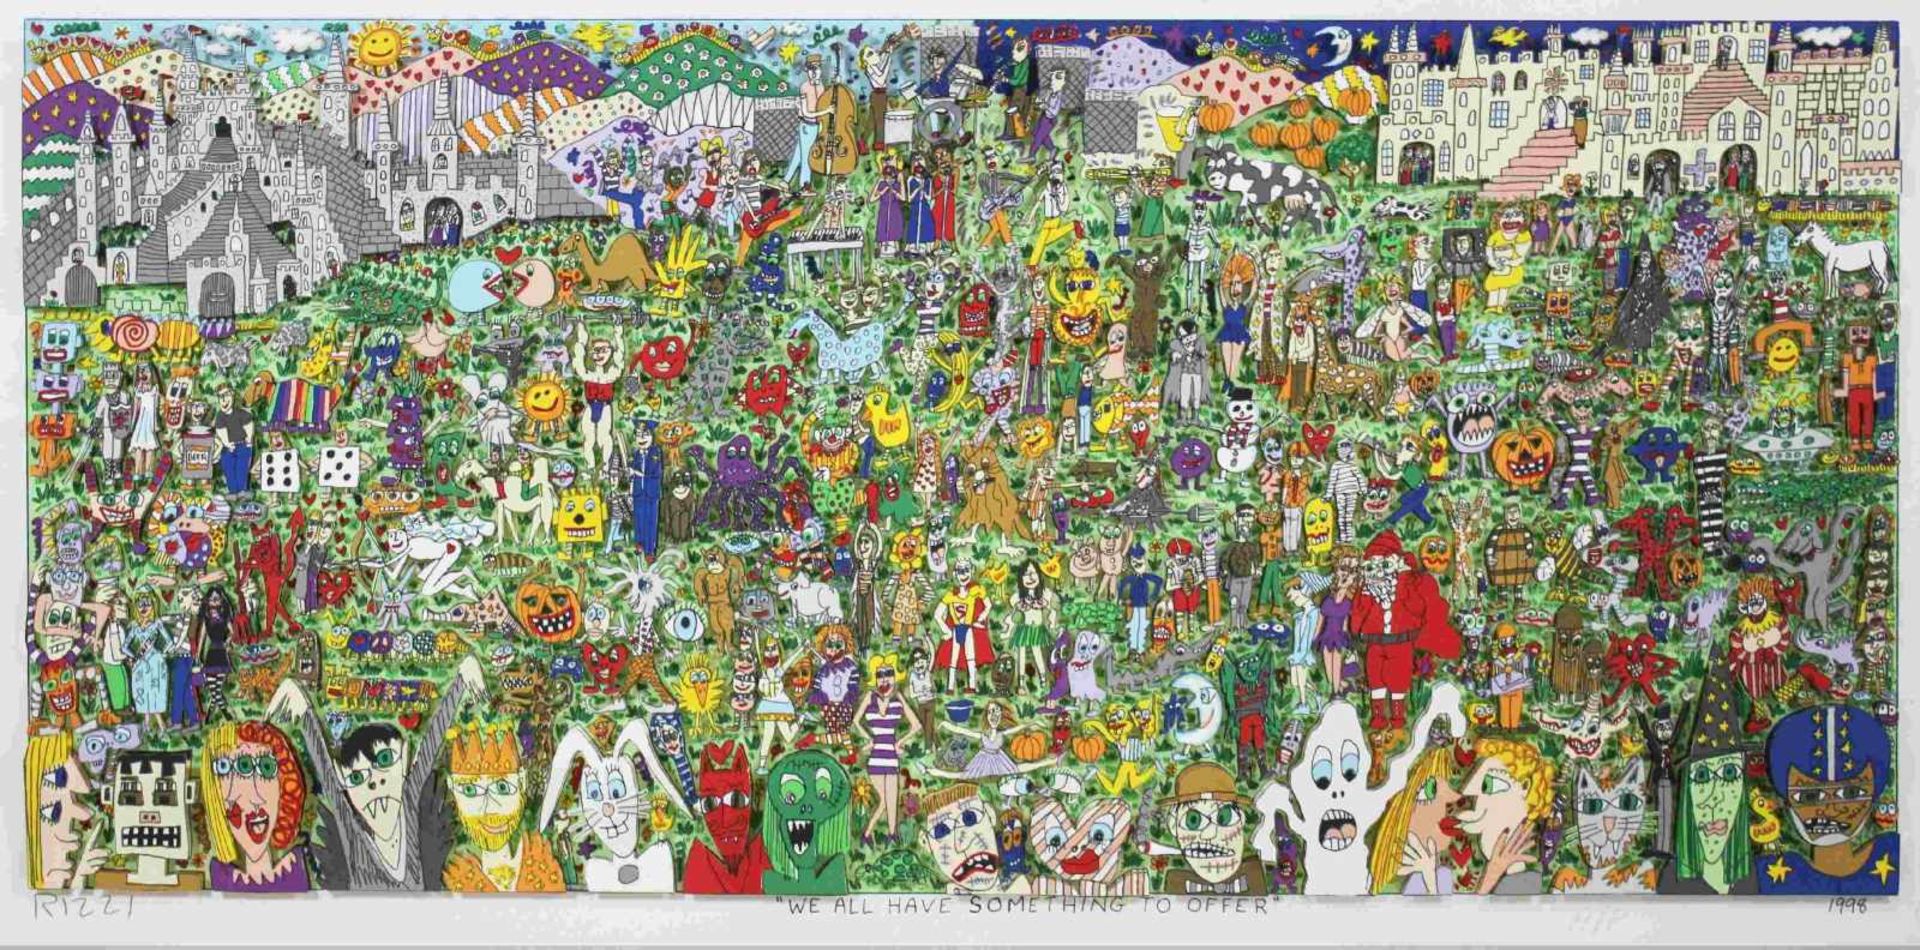 James Rizzi (1950 - 2011), We all have something to offer, 1998, 3-D Lithografie in Farbe, im